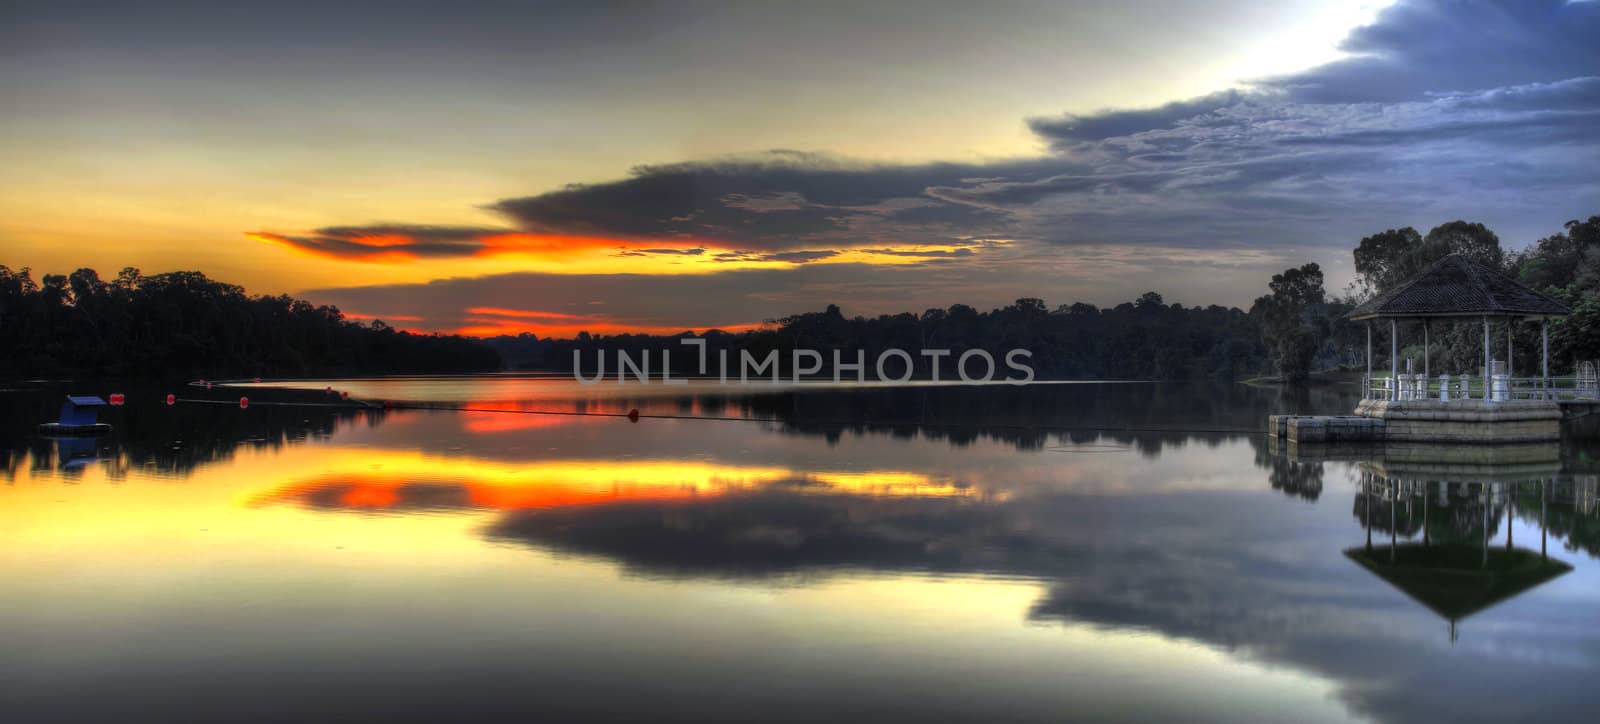 Sunset at the Lower Peirce Reservoir Lake in Singapore Panorama